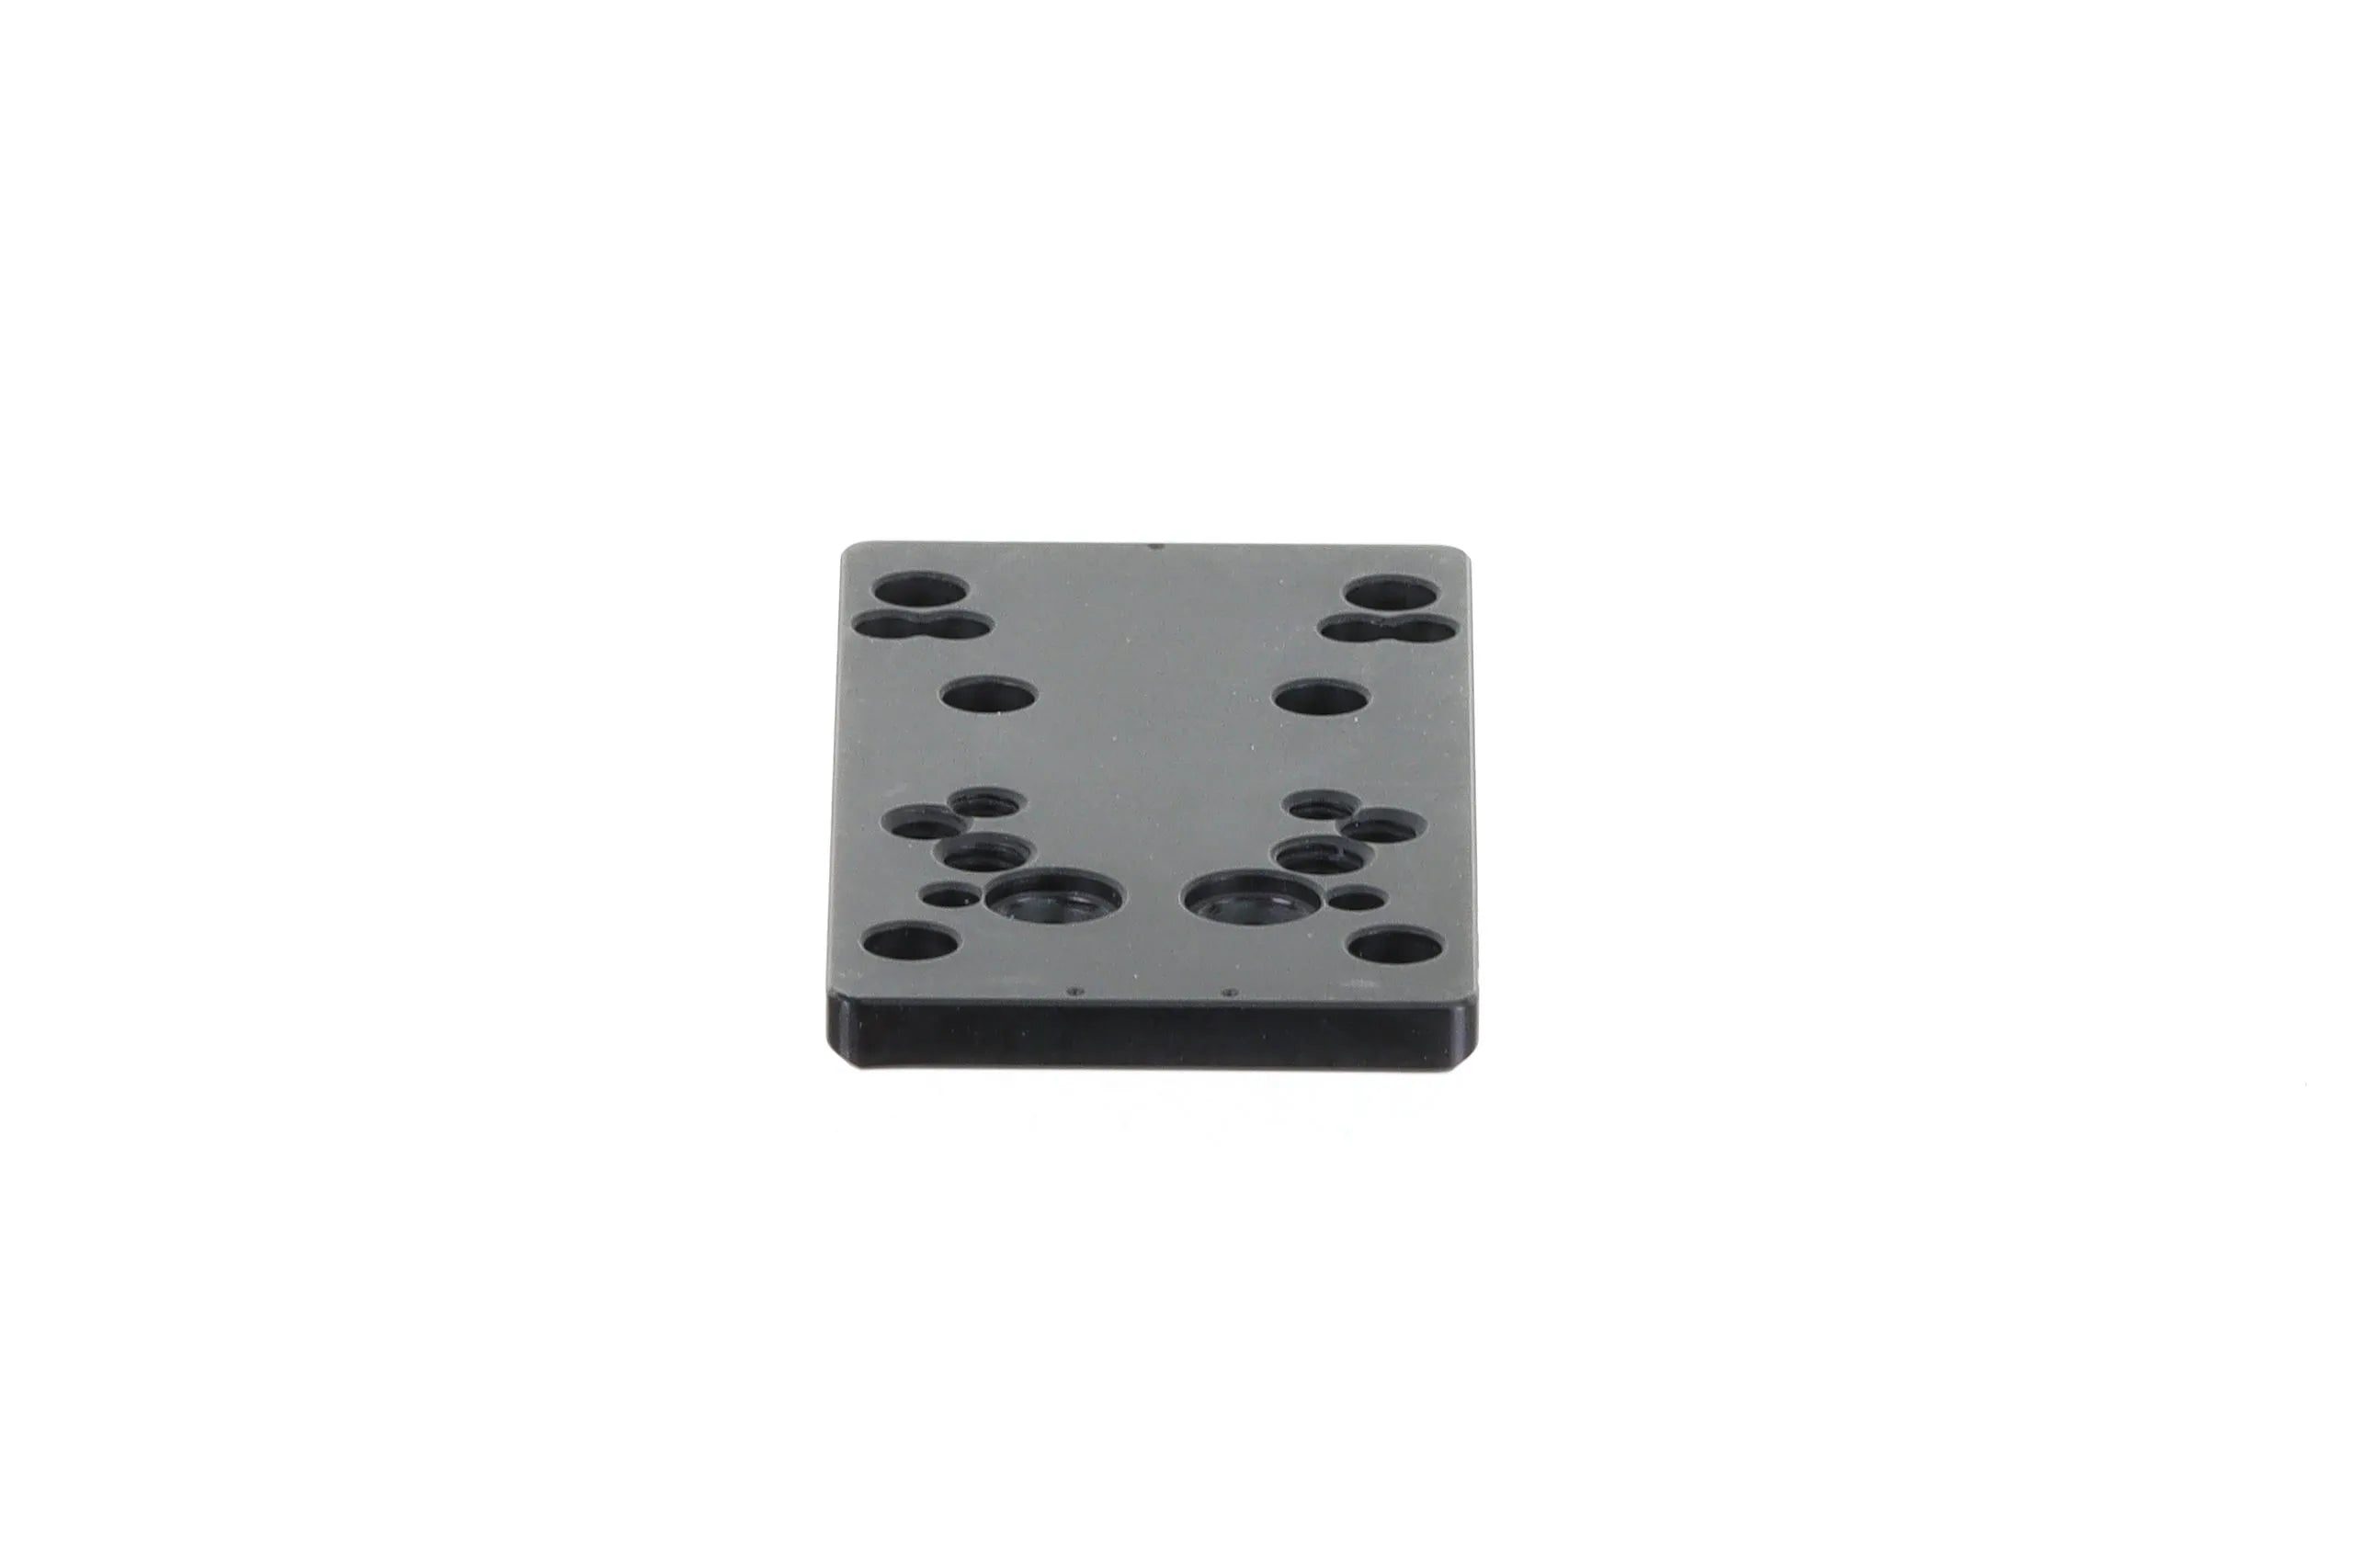 Springfield Armory XD Pistol Red Dot Adapter Mount Plate - OuterImpact